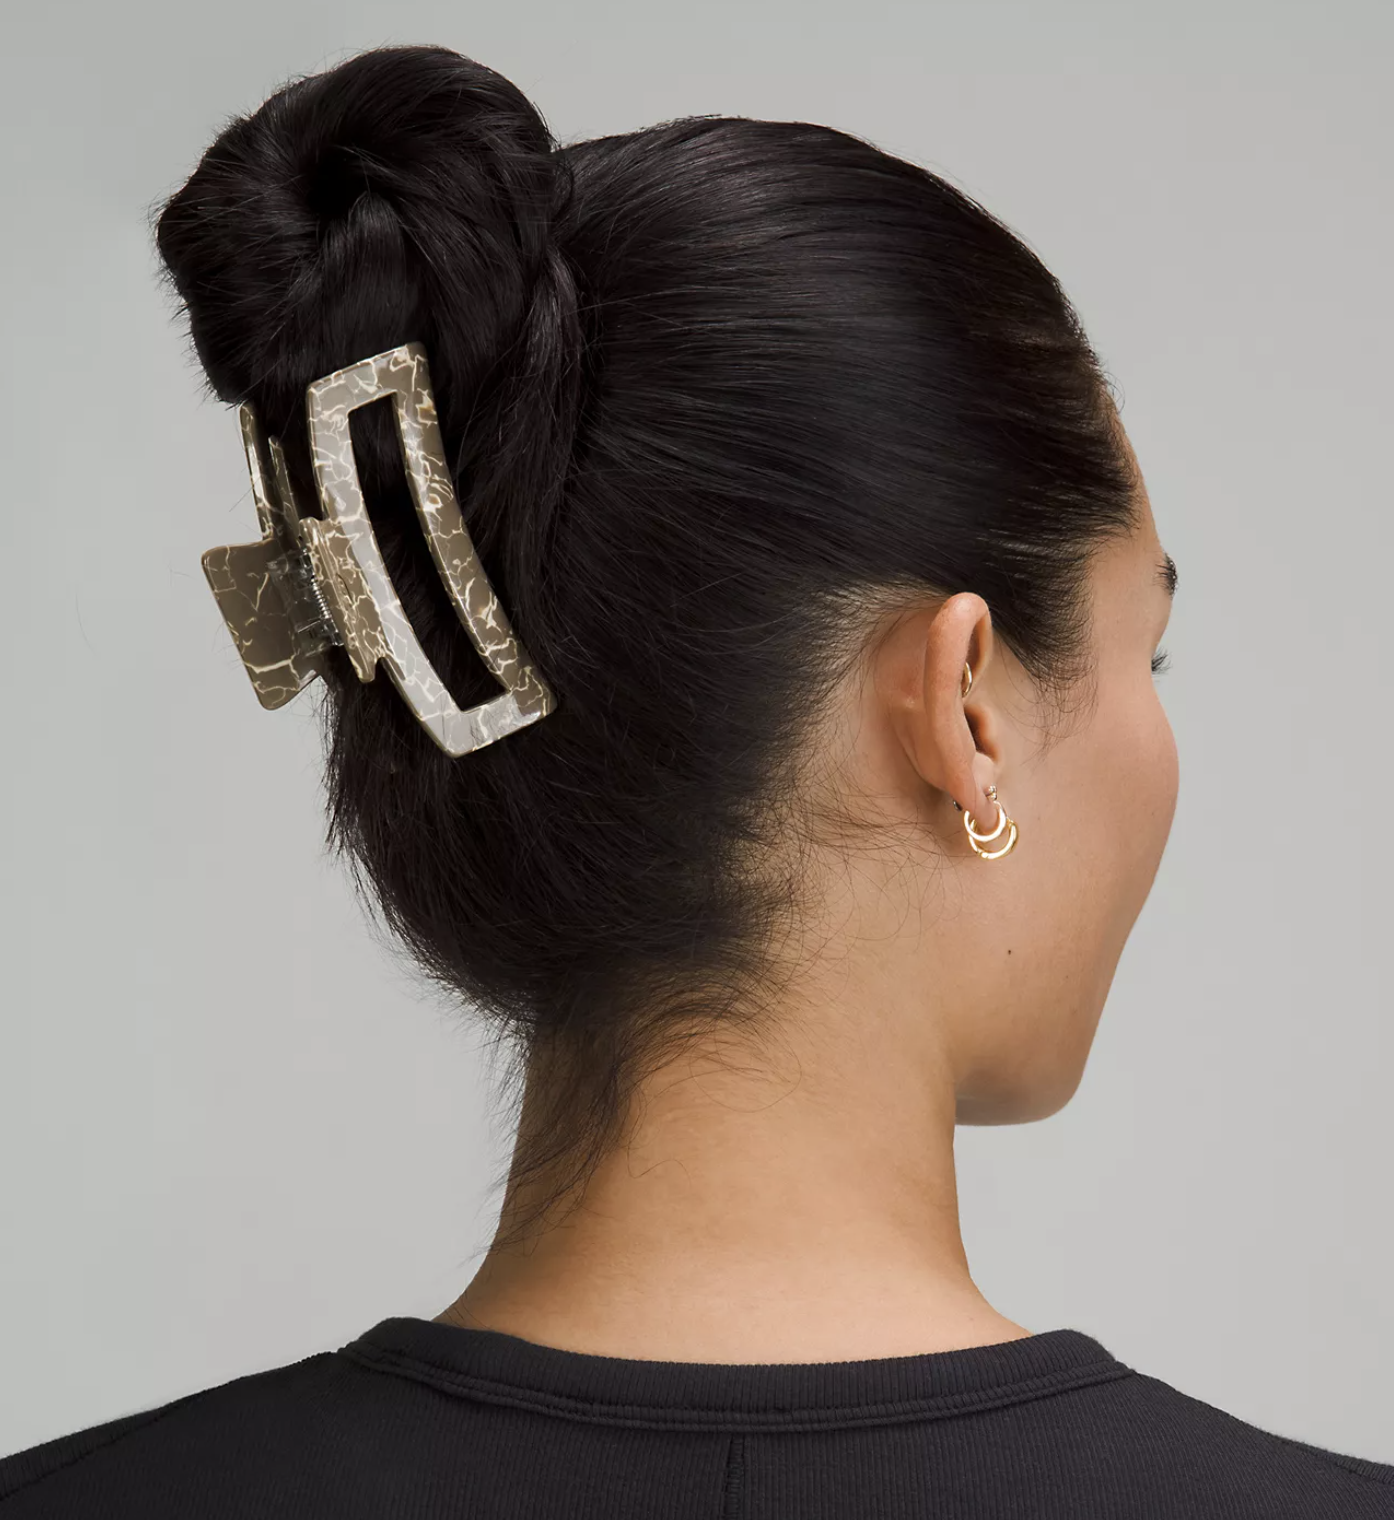 A person with their hair being held back with the claw clip